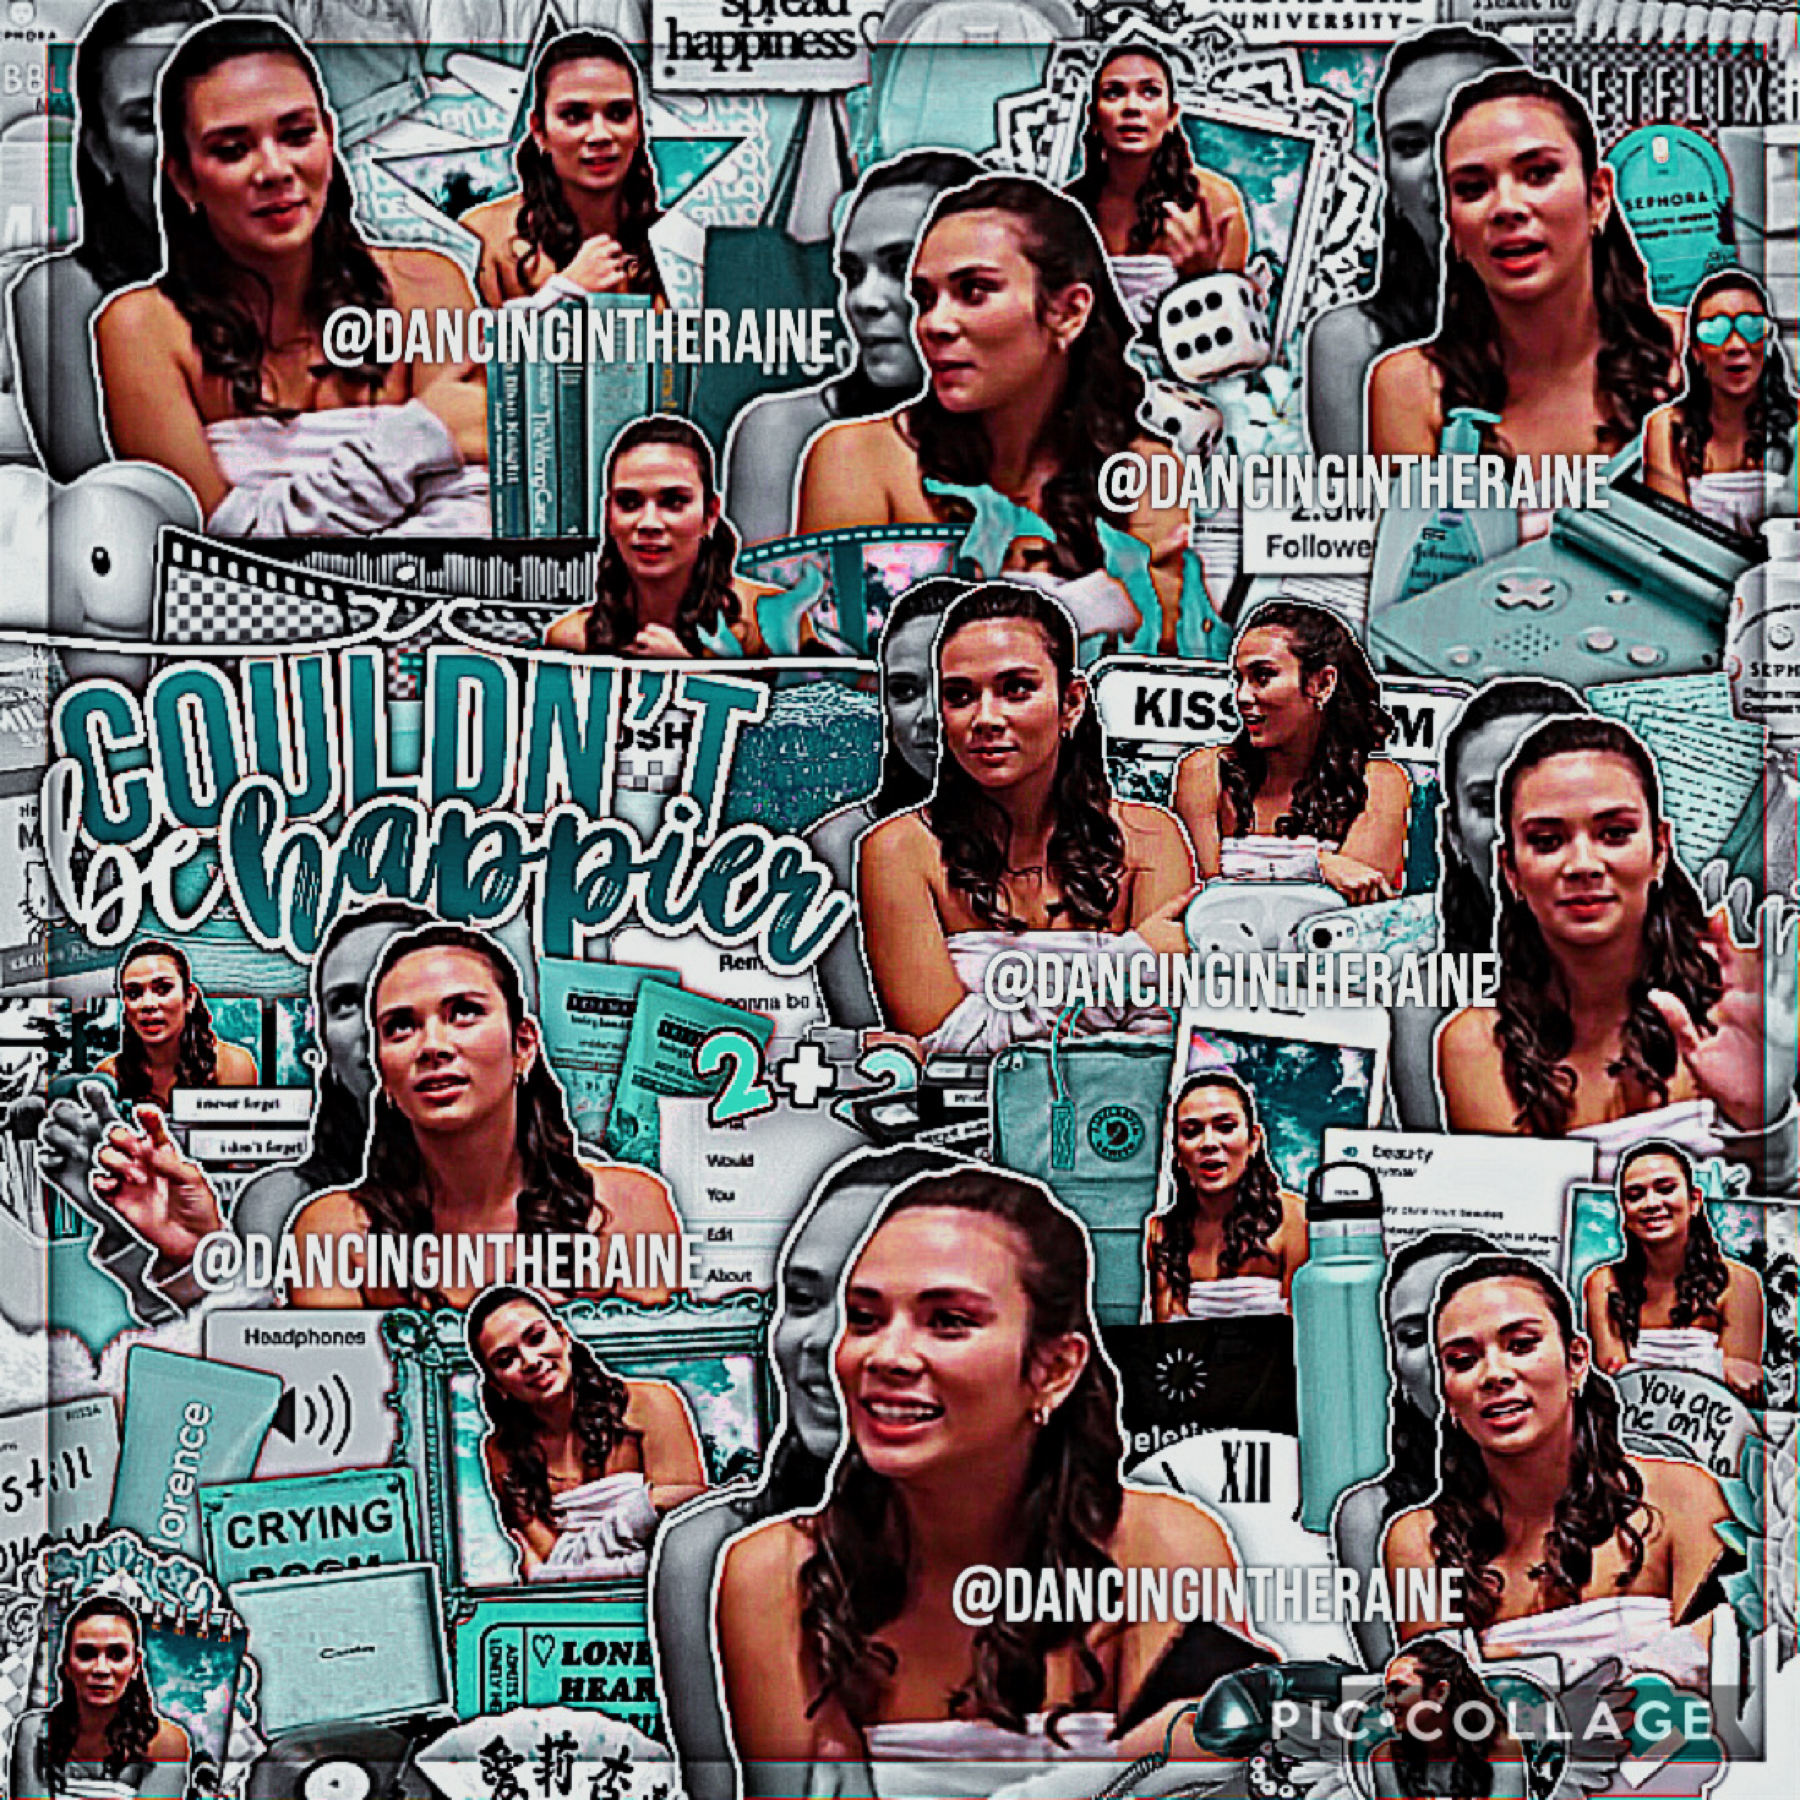 new COMPLEX edit (tap)

Info: Katie Ortencio (Lily on TNS)


Check me out on PicsArt!

@dancingintheraine for complex edits

&

@raineyxday for outline and blend edits


—————————————————————————